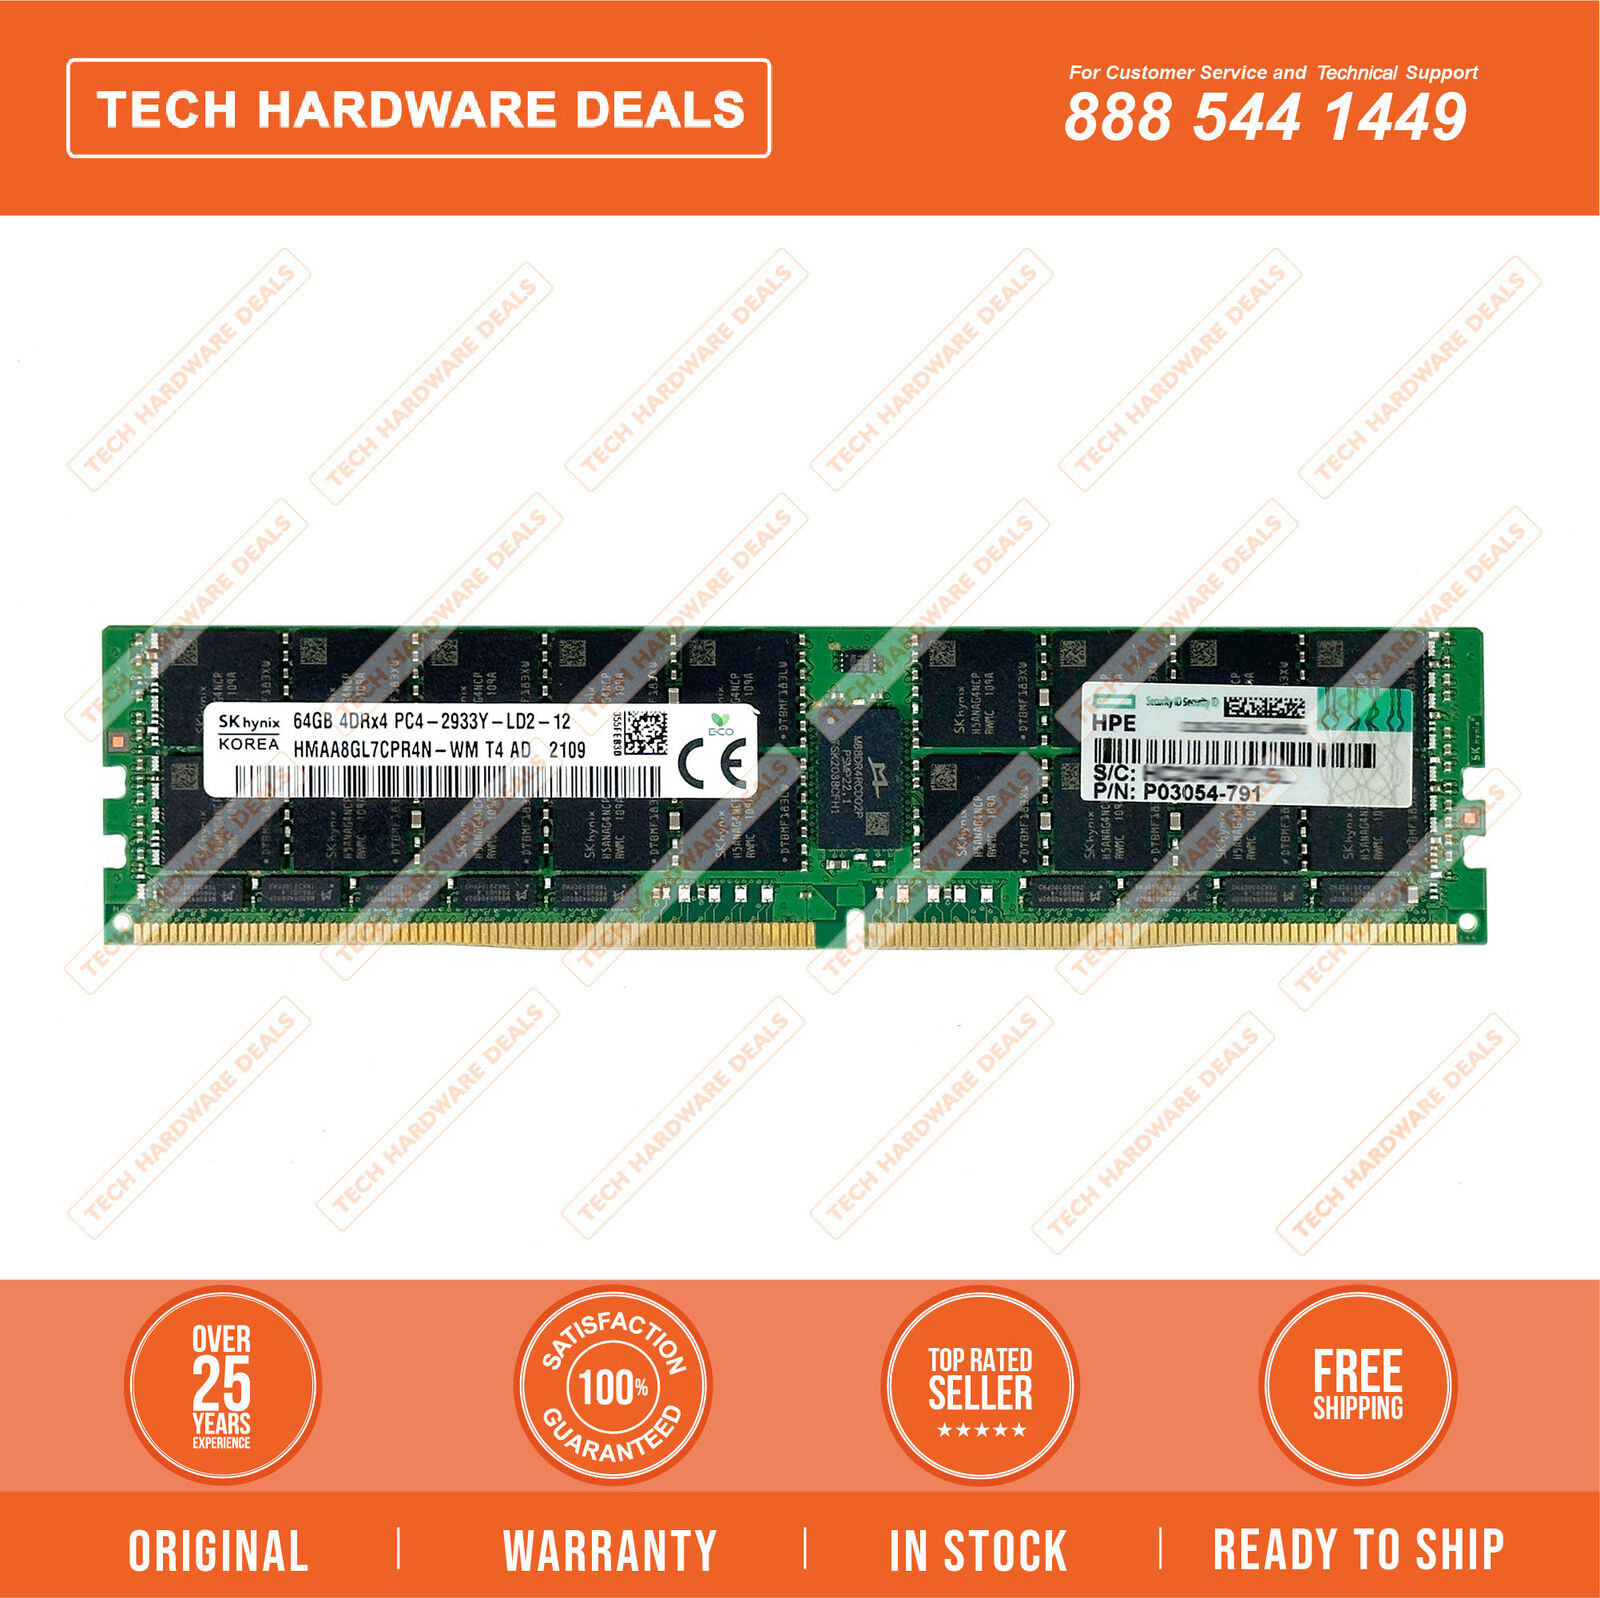 P03054-791    HP Synergy 64GB quad rank x 4 2933 Load Reduced Memory dimm